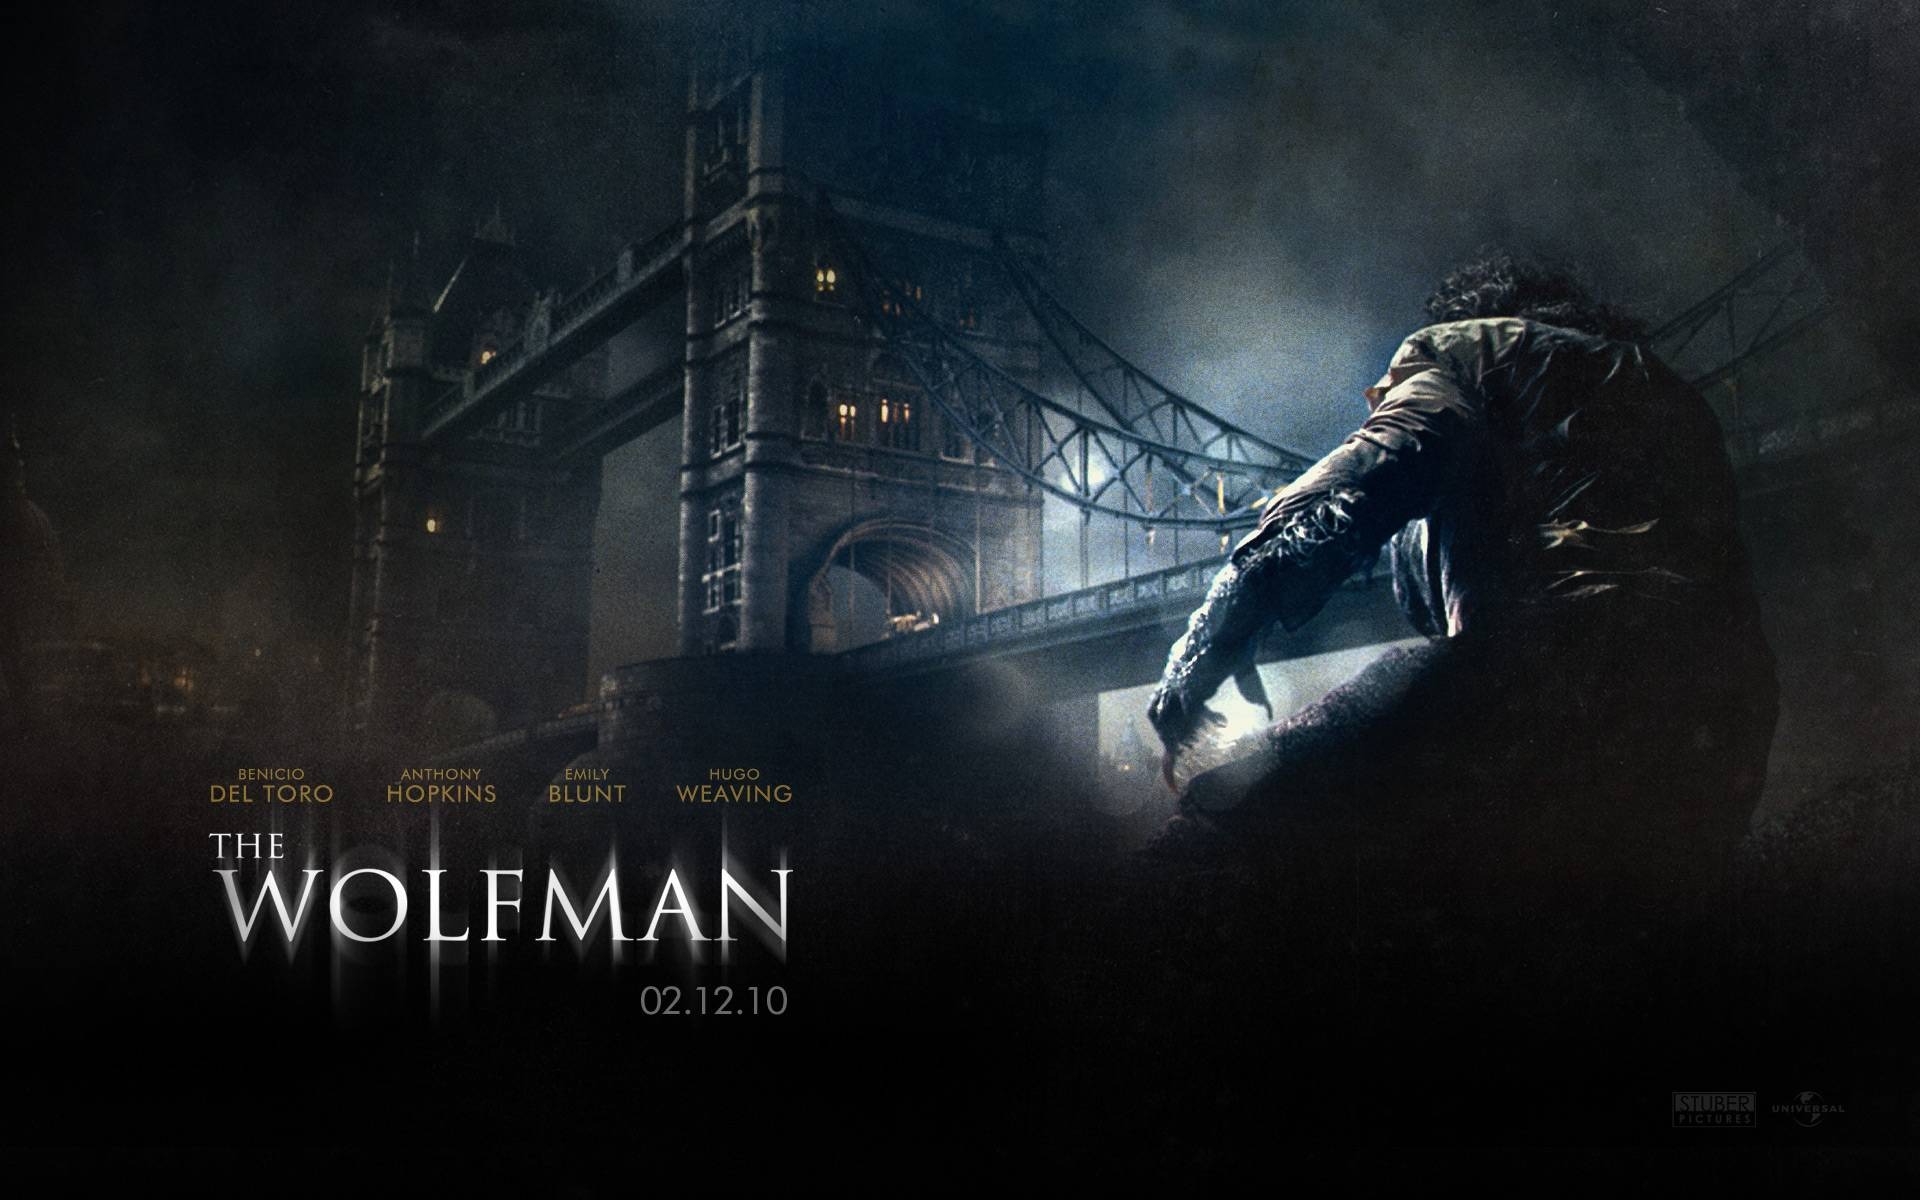 The Wolfman Movie Wallpapers #5 - 1920x1200